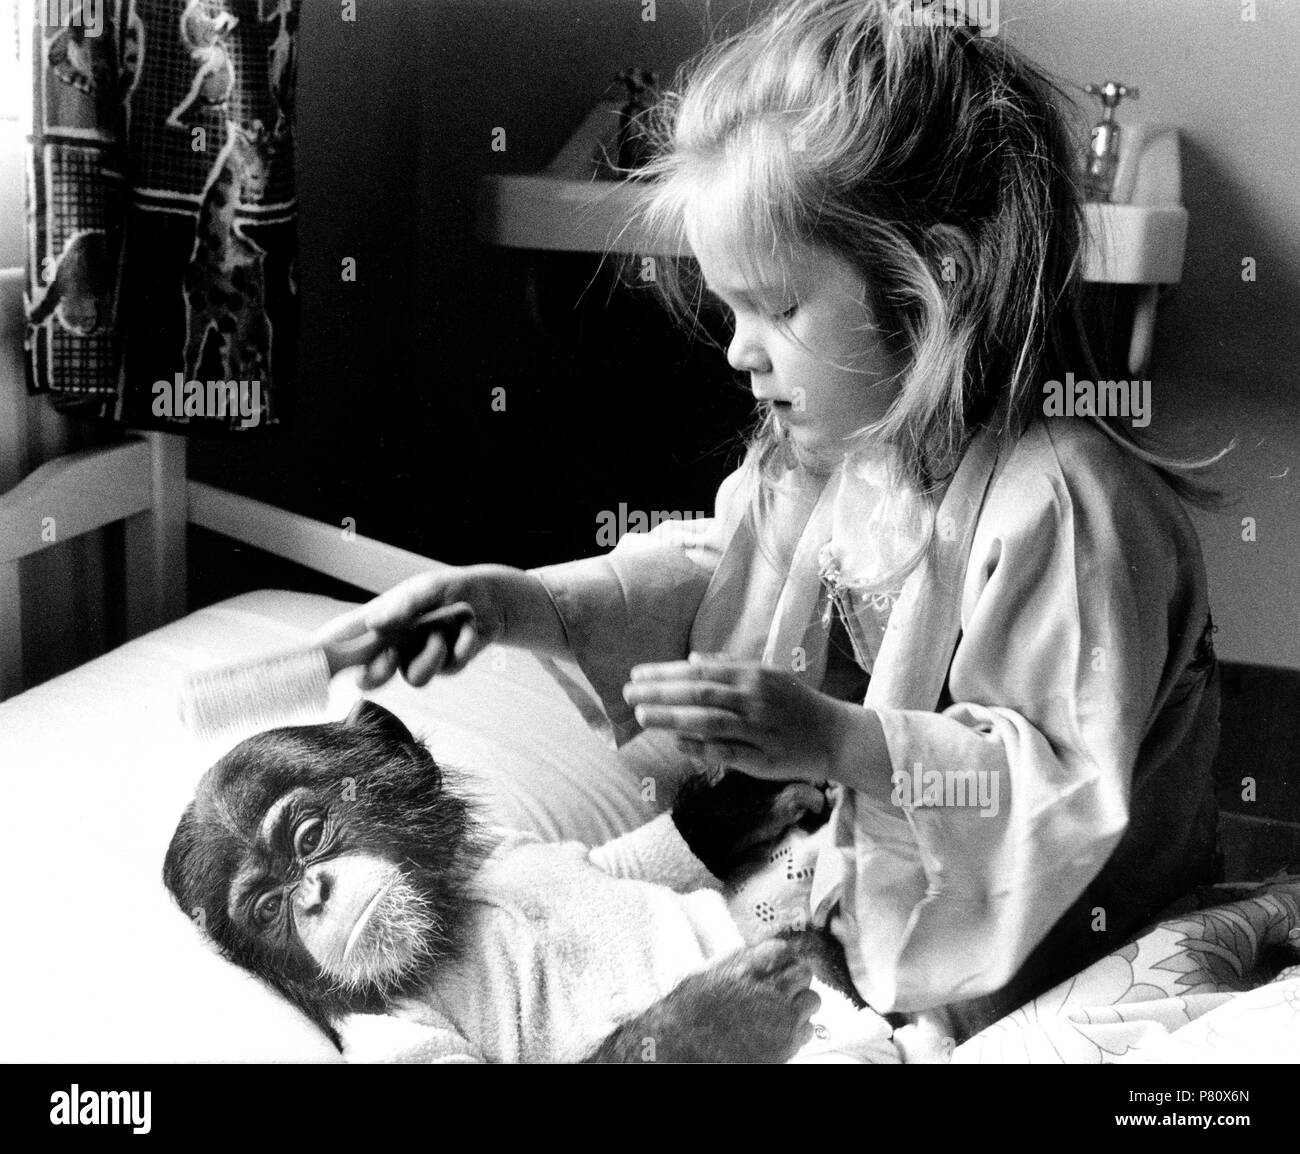 Girl with chimpanzee baby, England, Great Britain Stock Photo